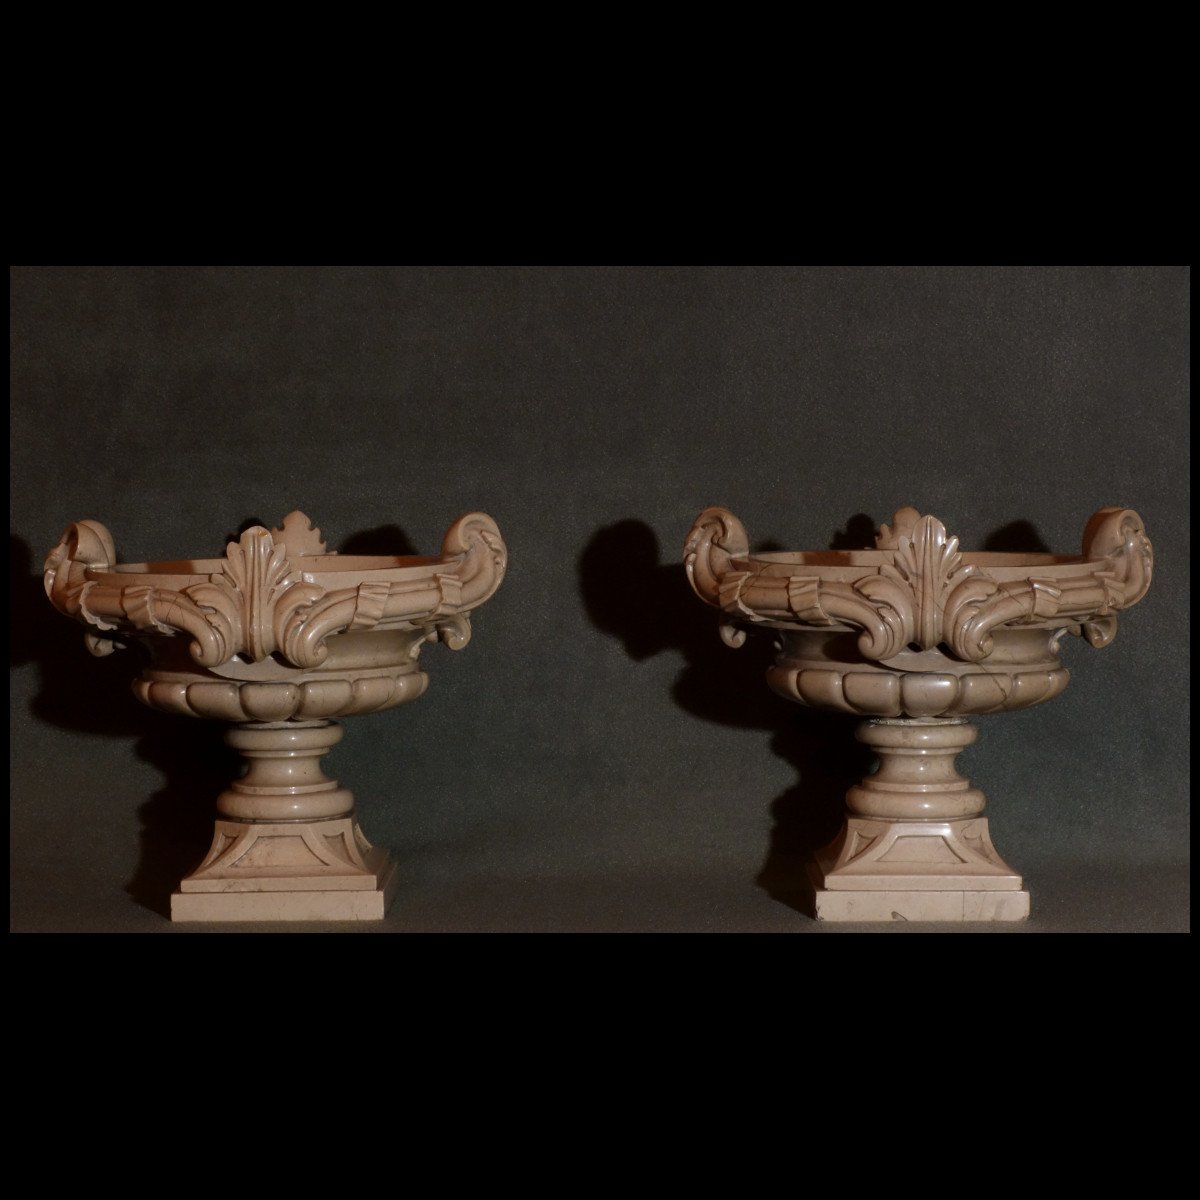 Pair Of Botticino Marble Basins From The Grand Tour XIXth